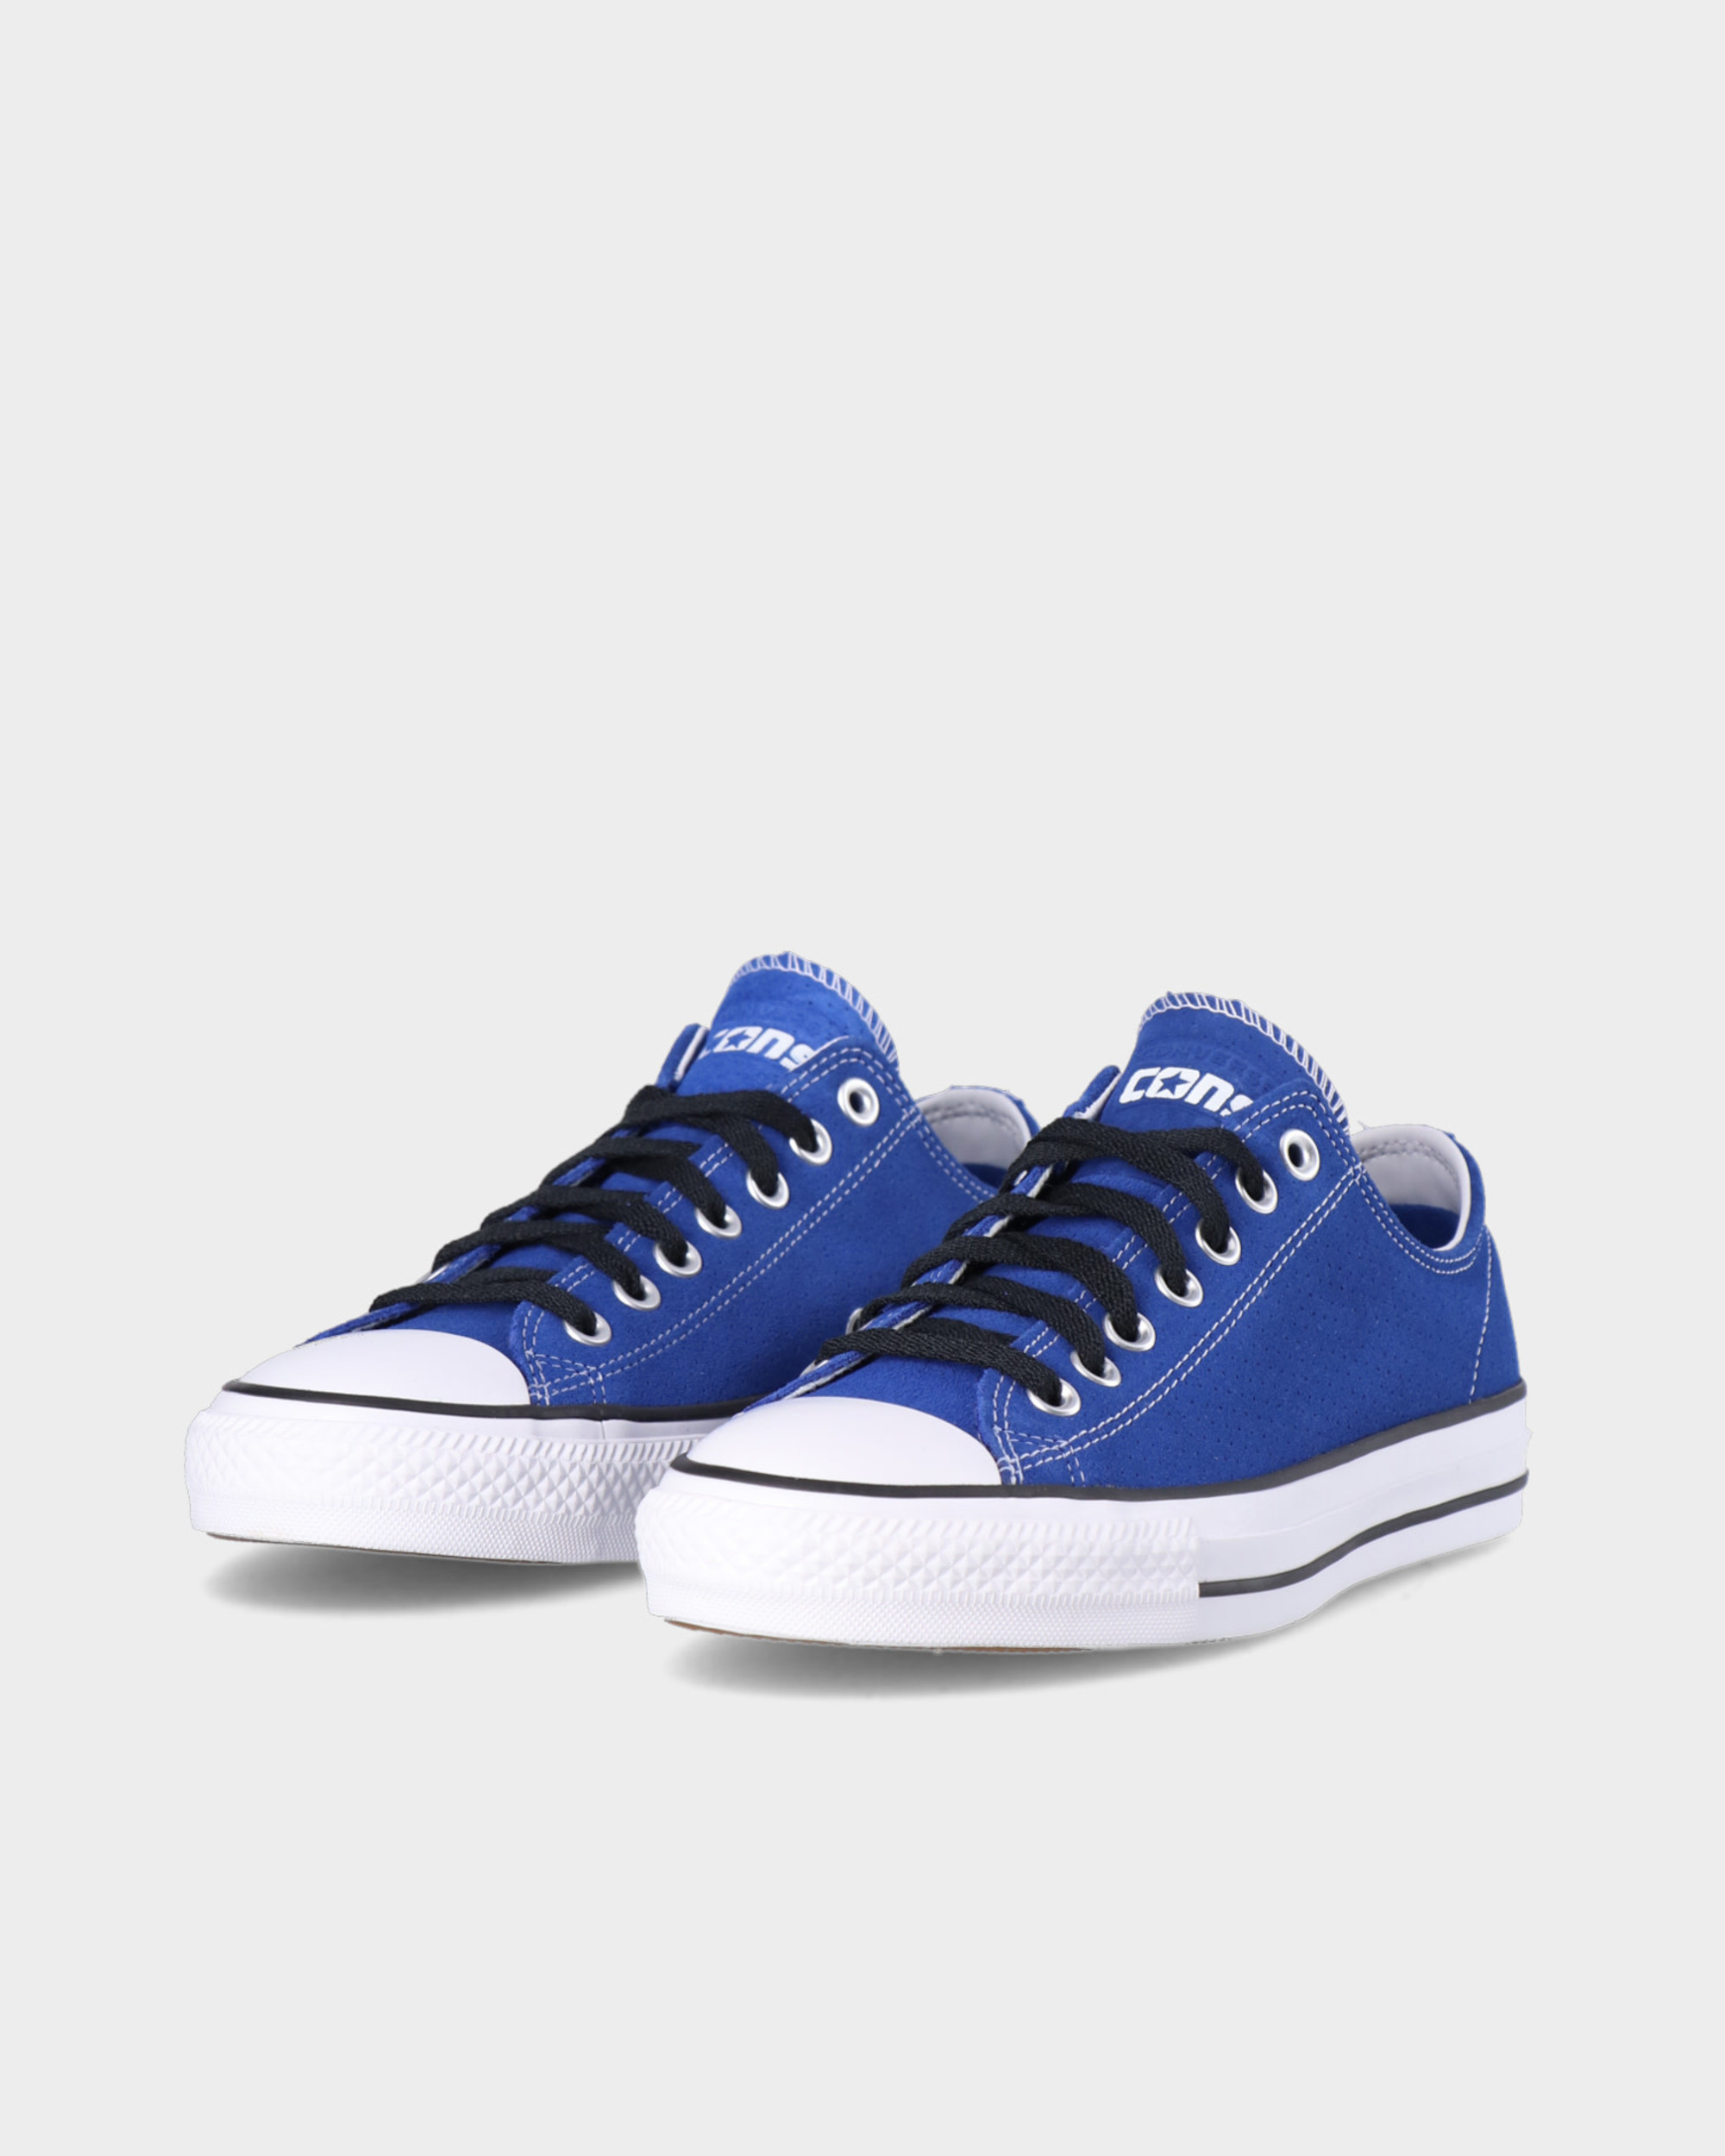 Converse Chuck Taylor All Star Pro Embossed Suede Ox Rush Blue/Black/White